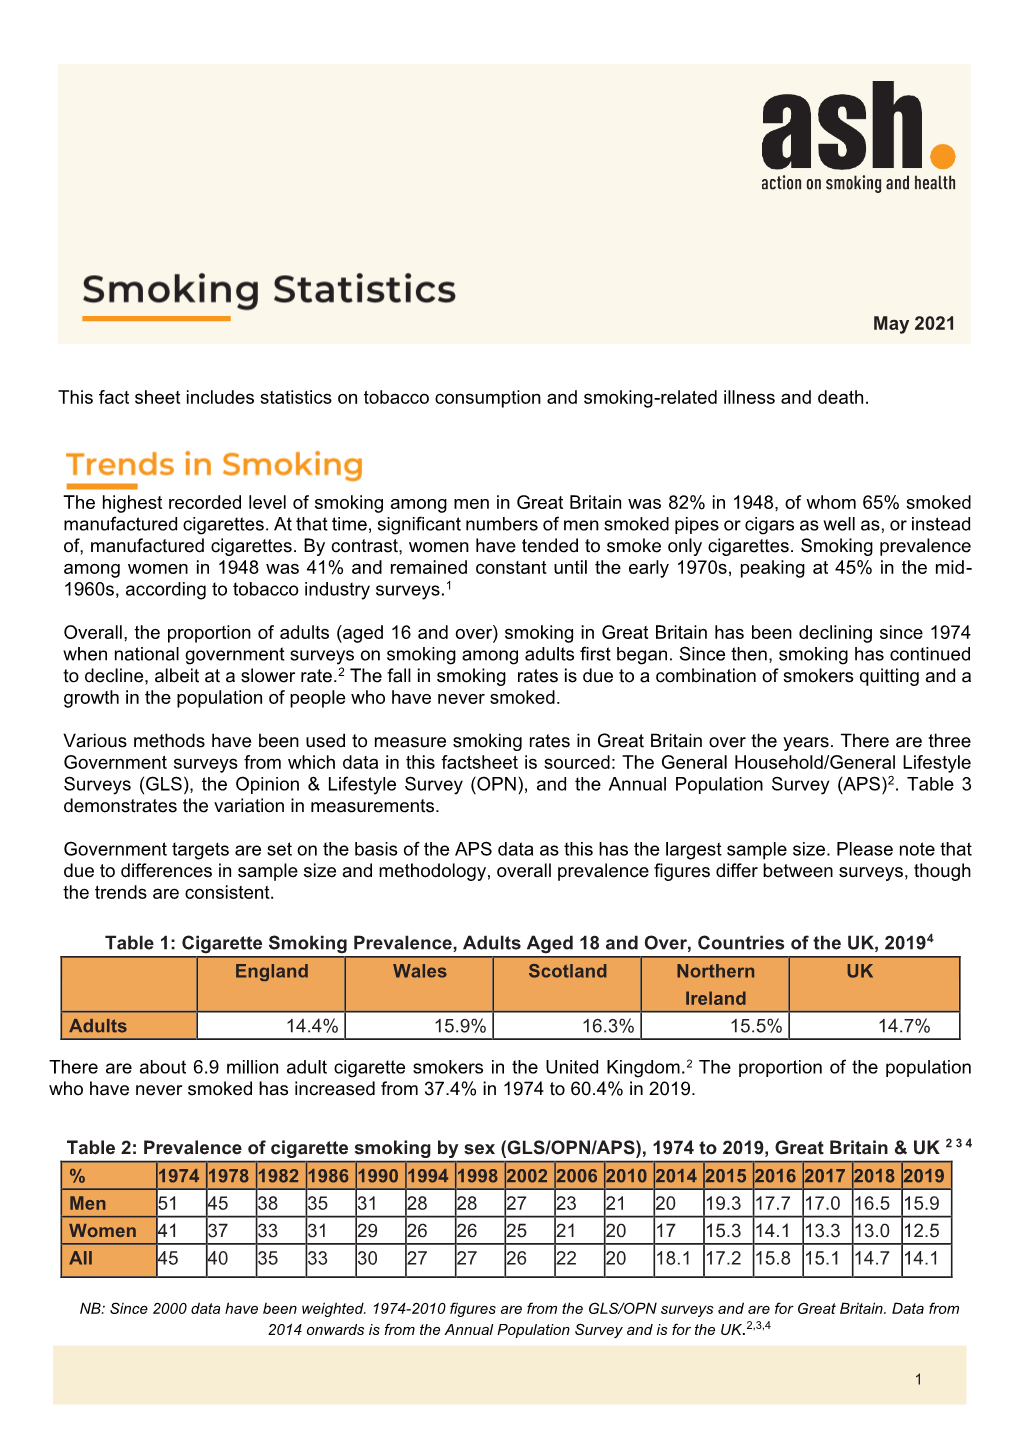 This Fact Sheet Includes Statistics on Tobacco Consumption and Smoking-Related Illness and Death